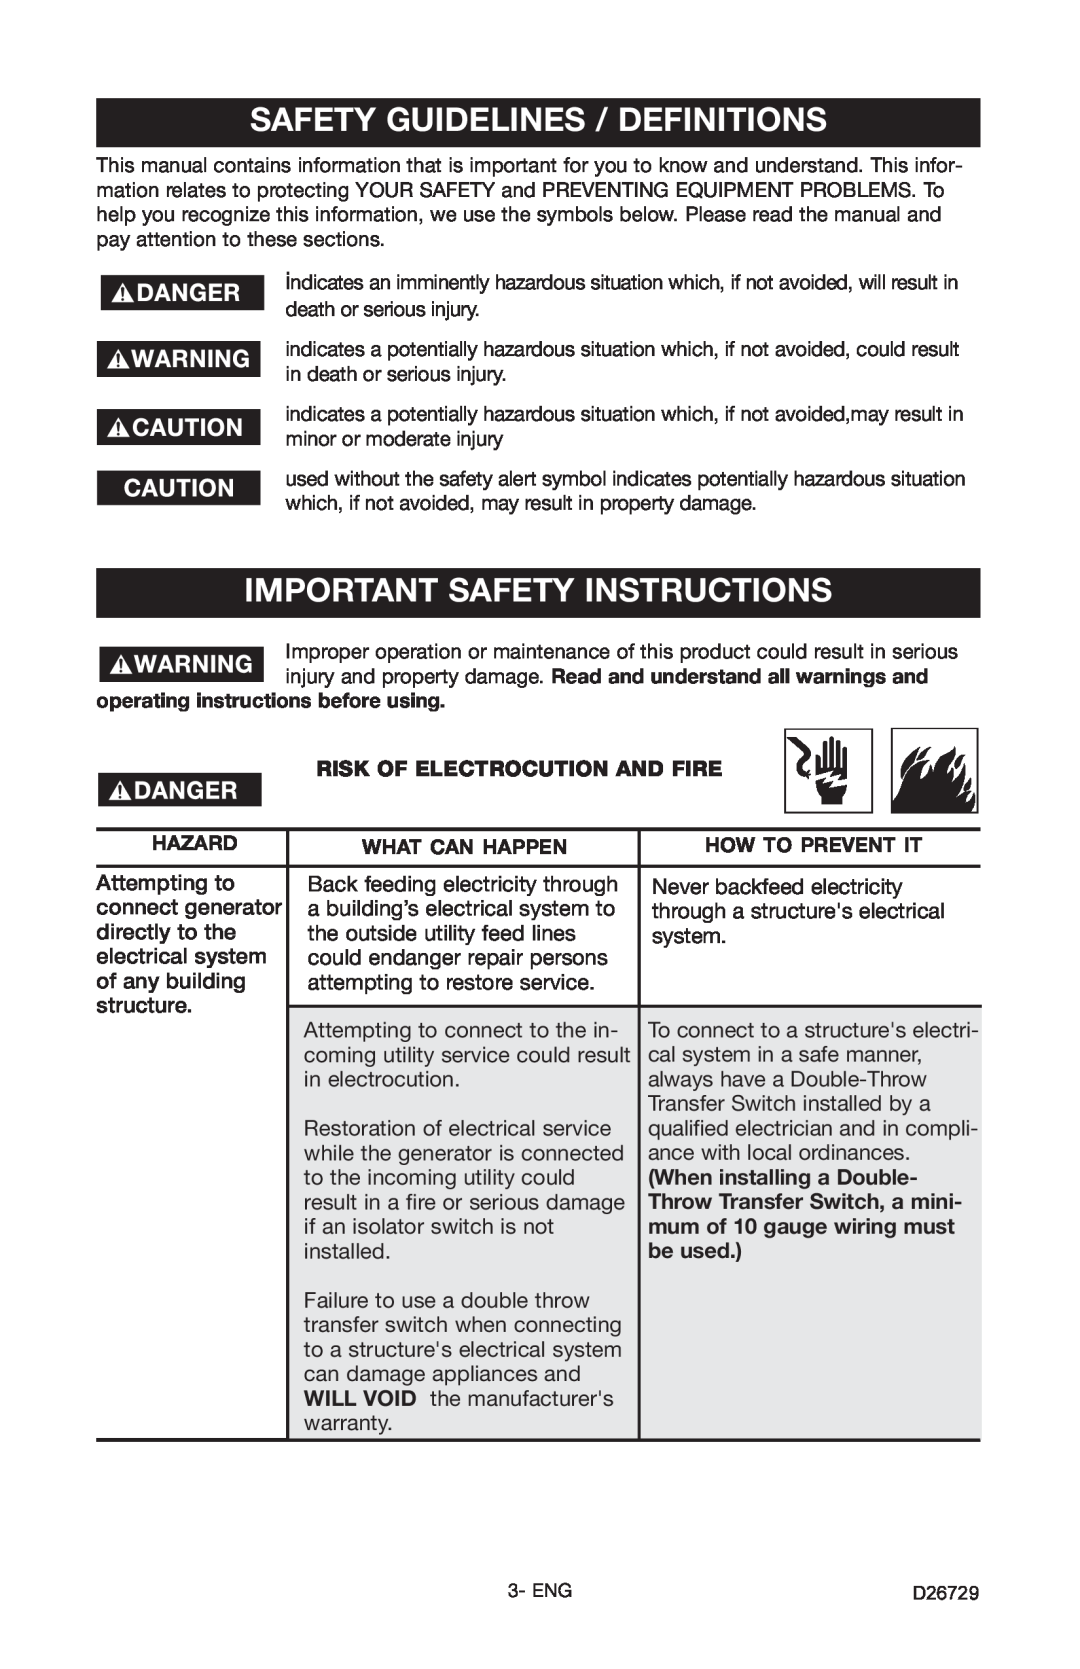 Porter-Cable D26729-028-0 Safety Guidelines / Definitions, Important Safety Instructions, Risk Of Electrocution And Fire 